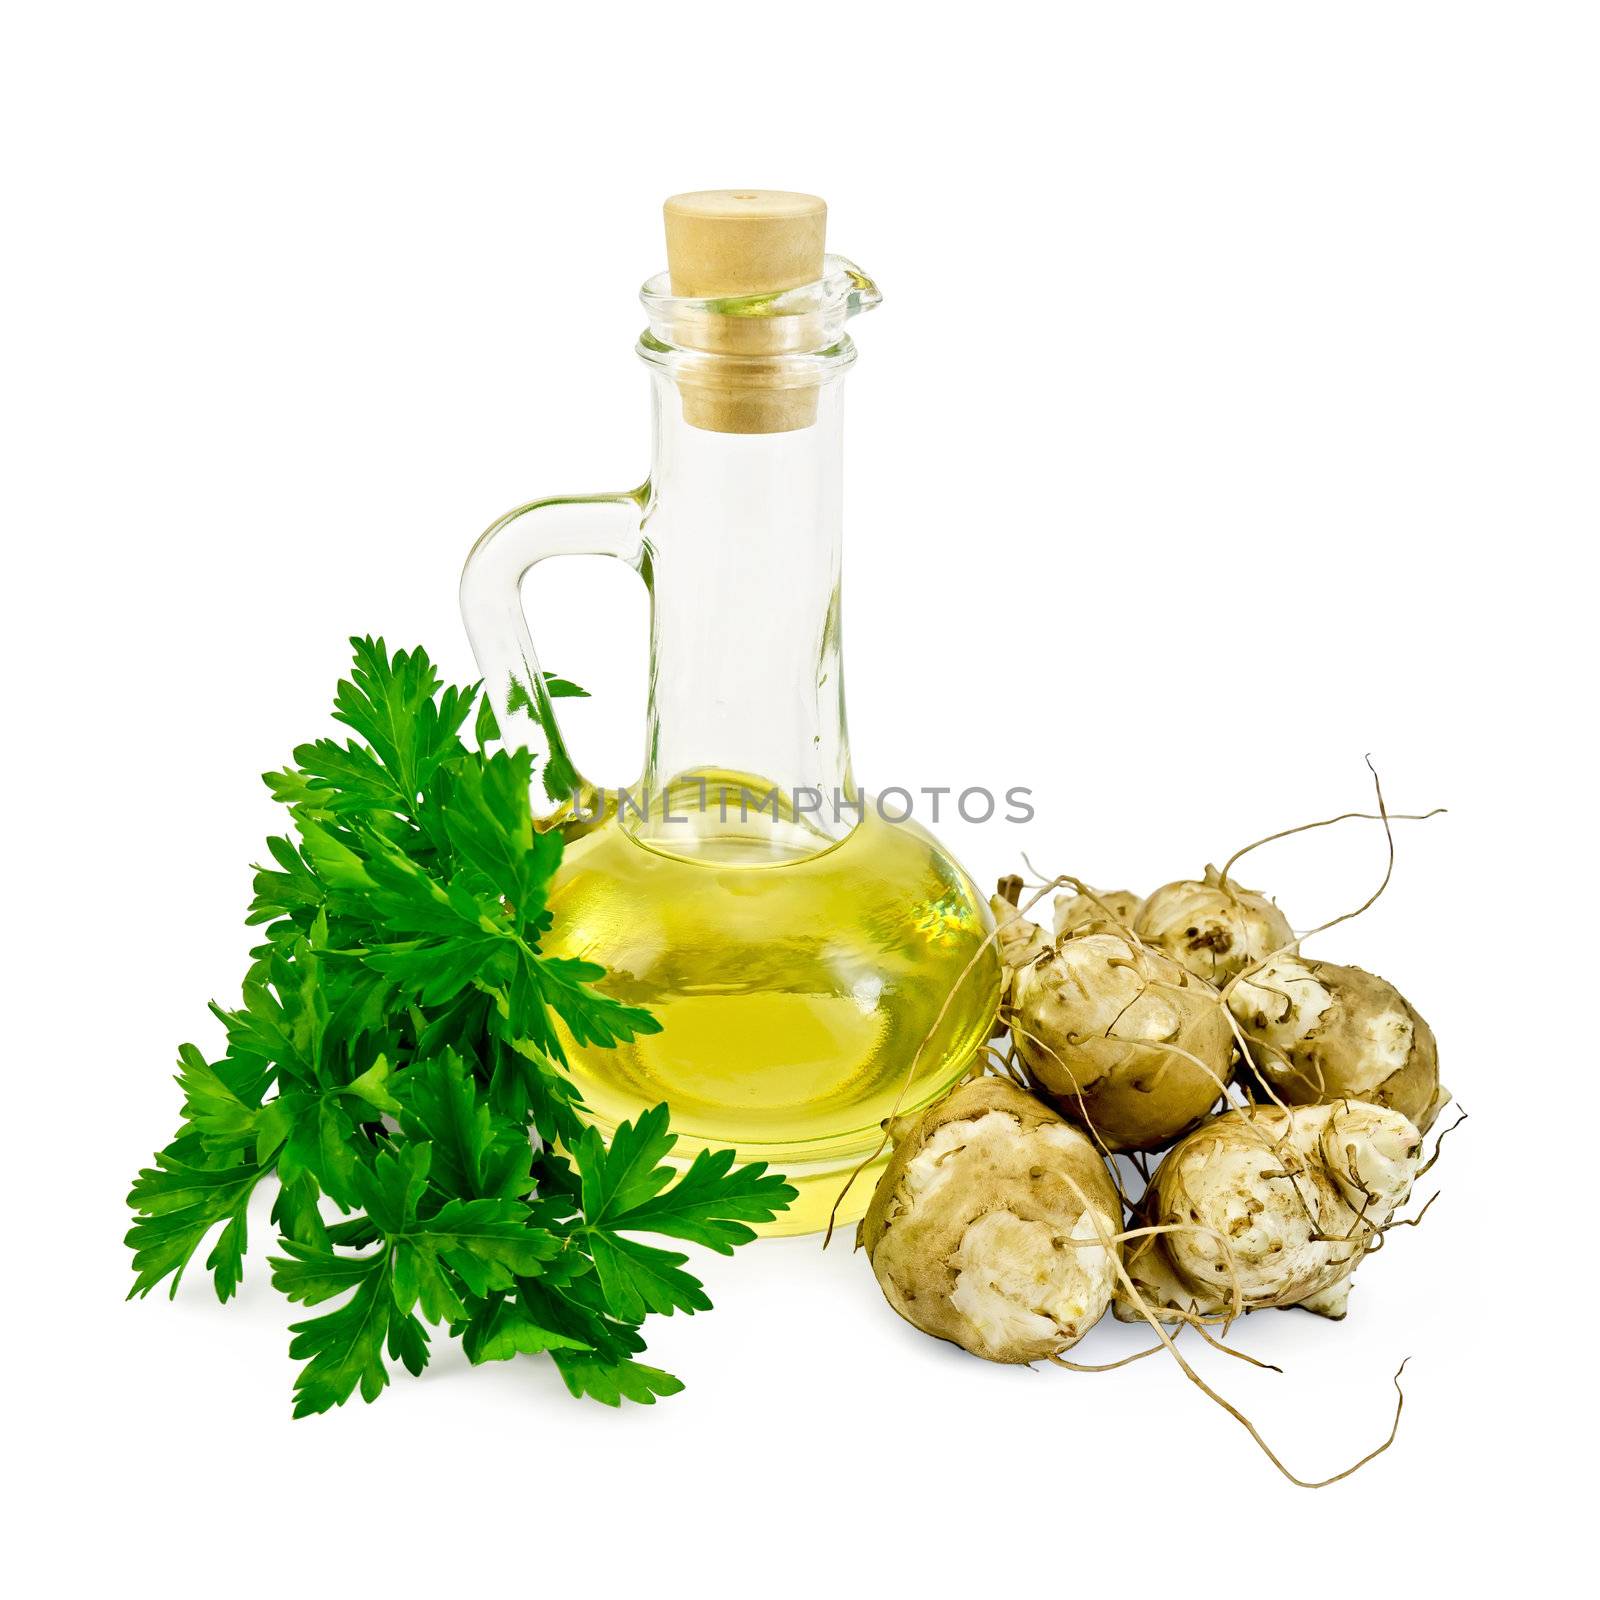 Several of tubers of Jerusalem artichoke with parsley and a bottle of vegetable oil isolated on white background
